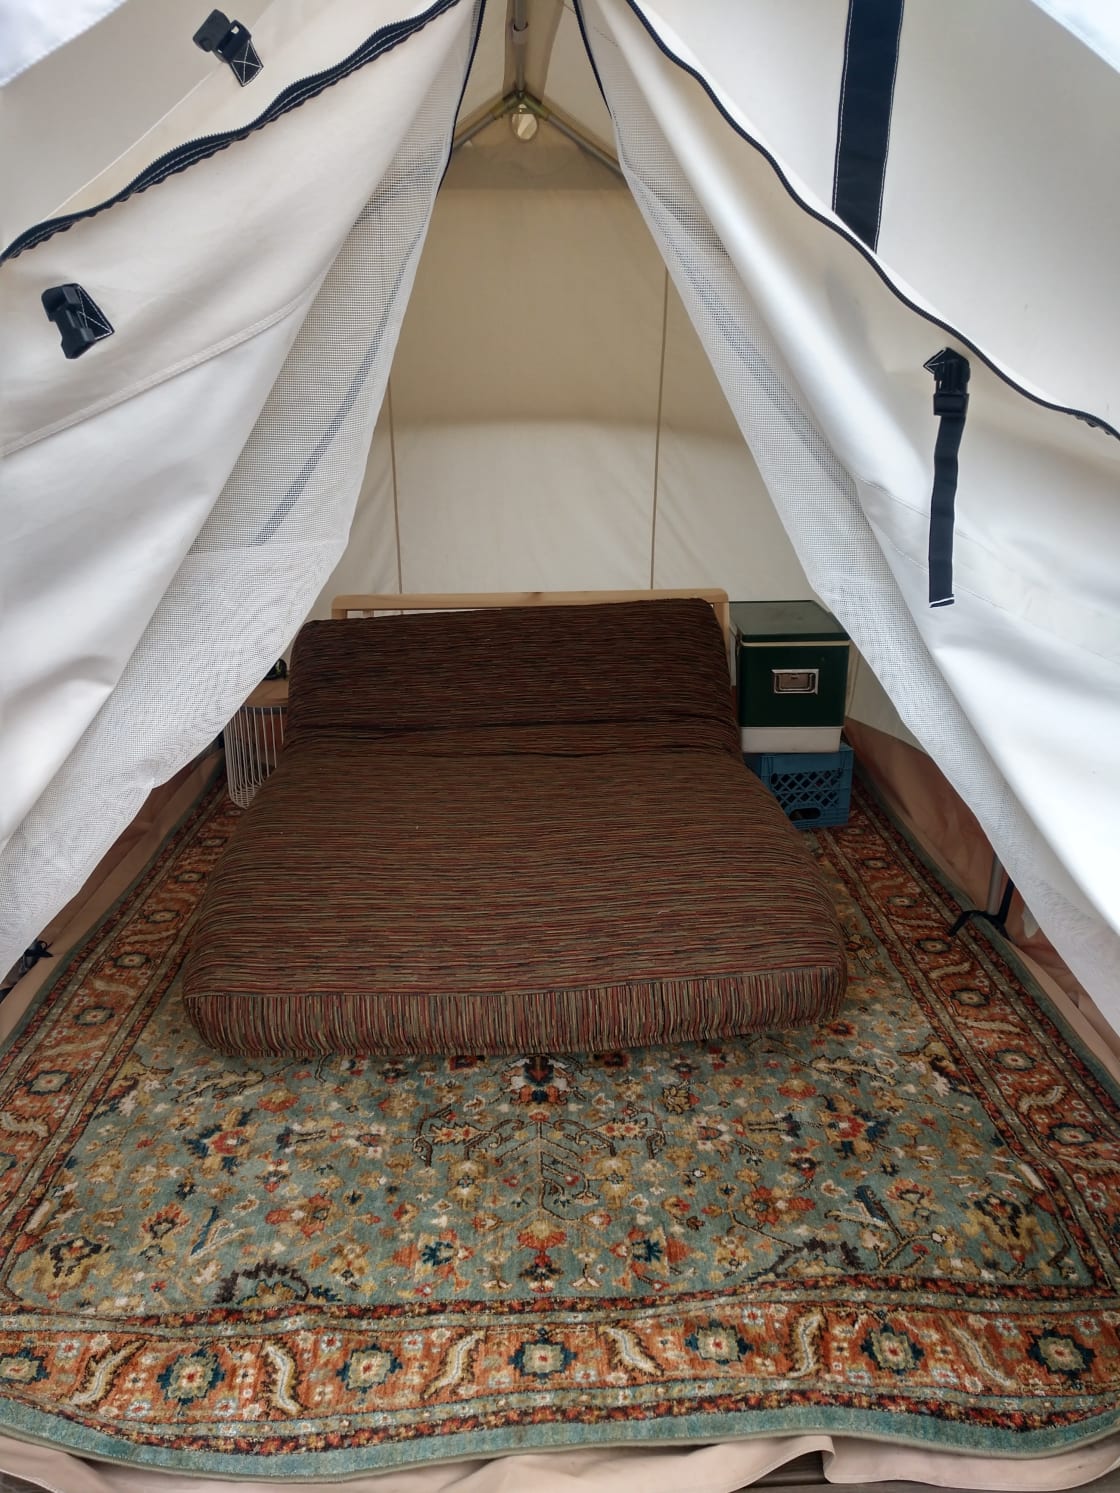 The private futon in the tent just waiting for you !